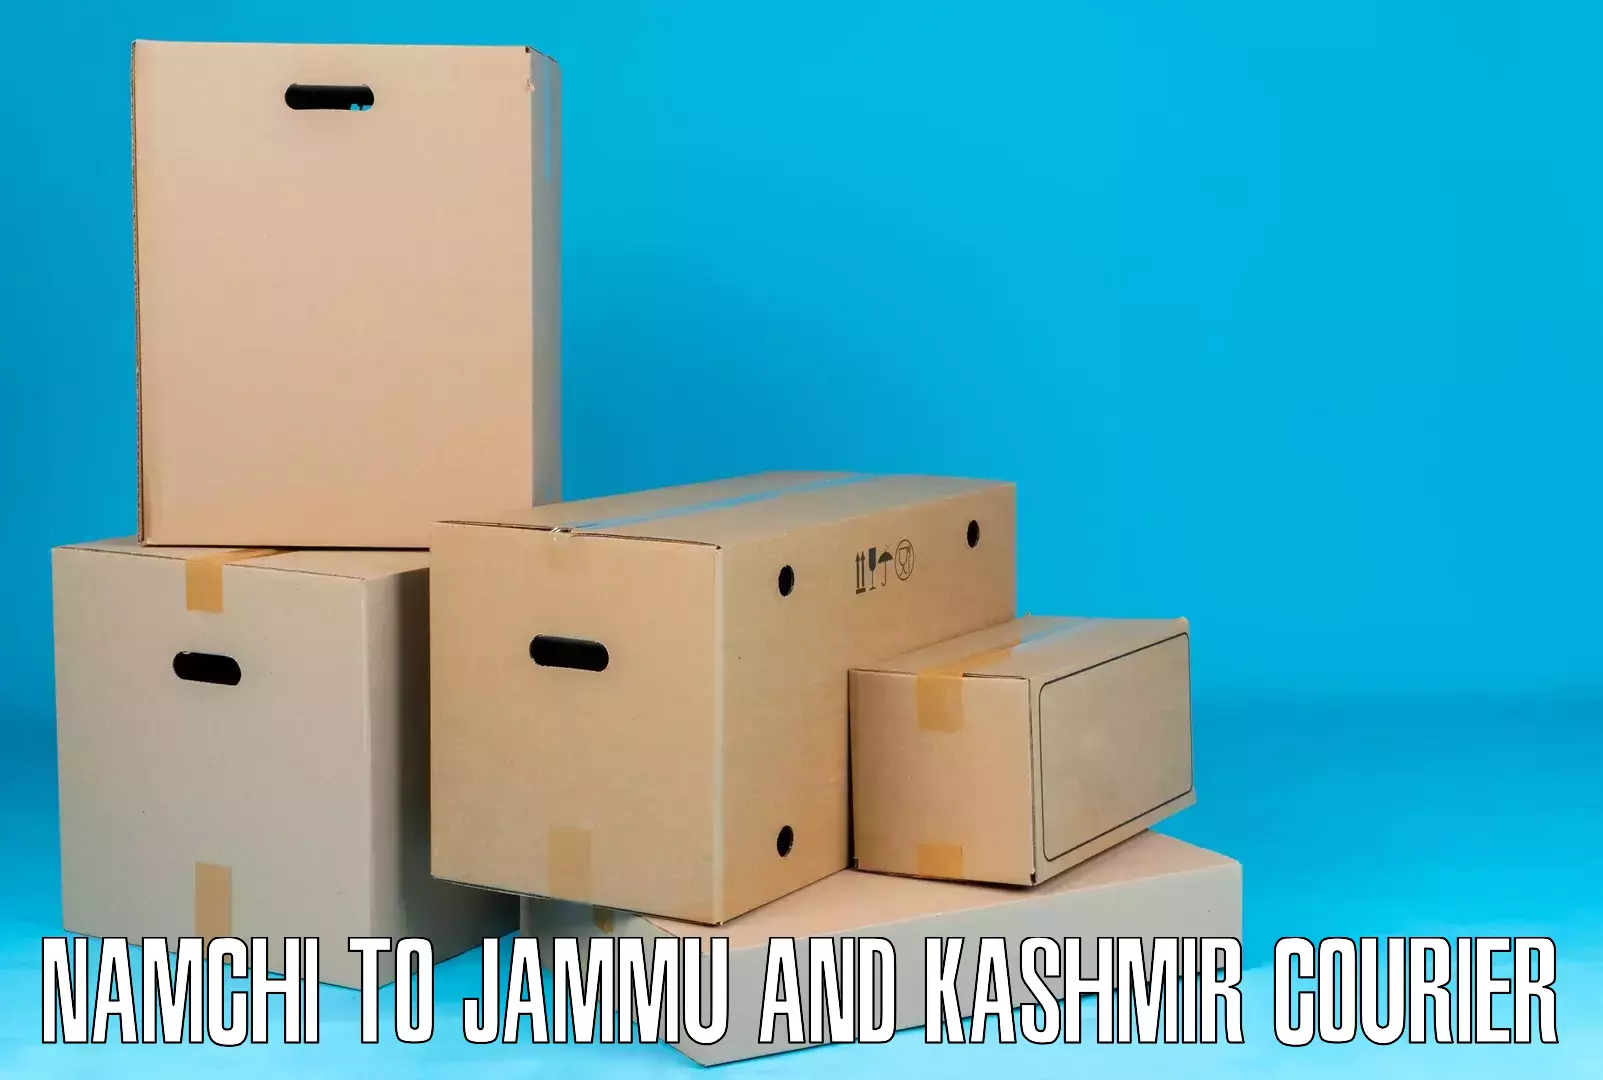 Residential courier service Namchi to University of Jammu